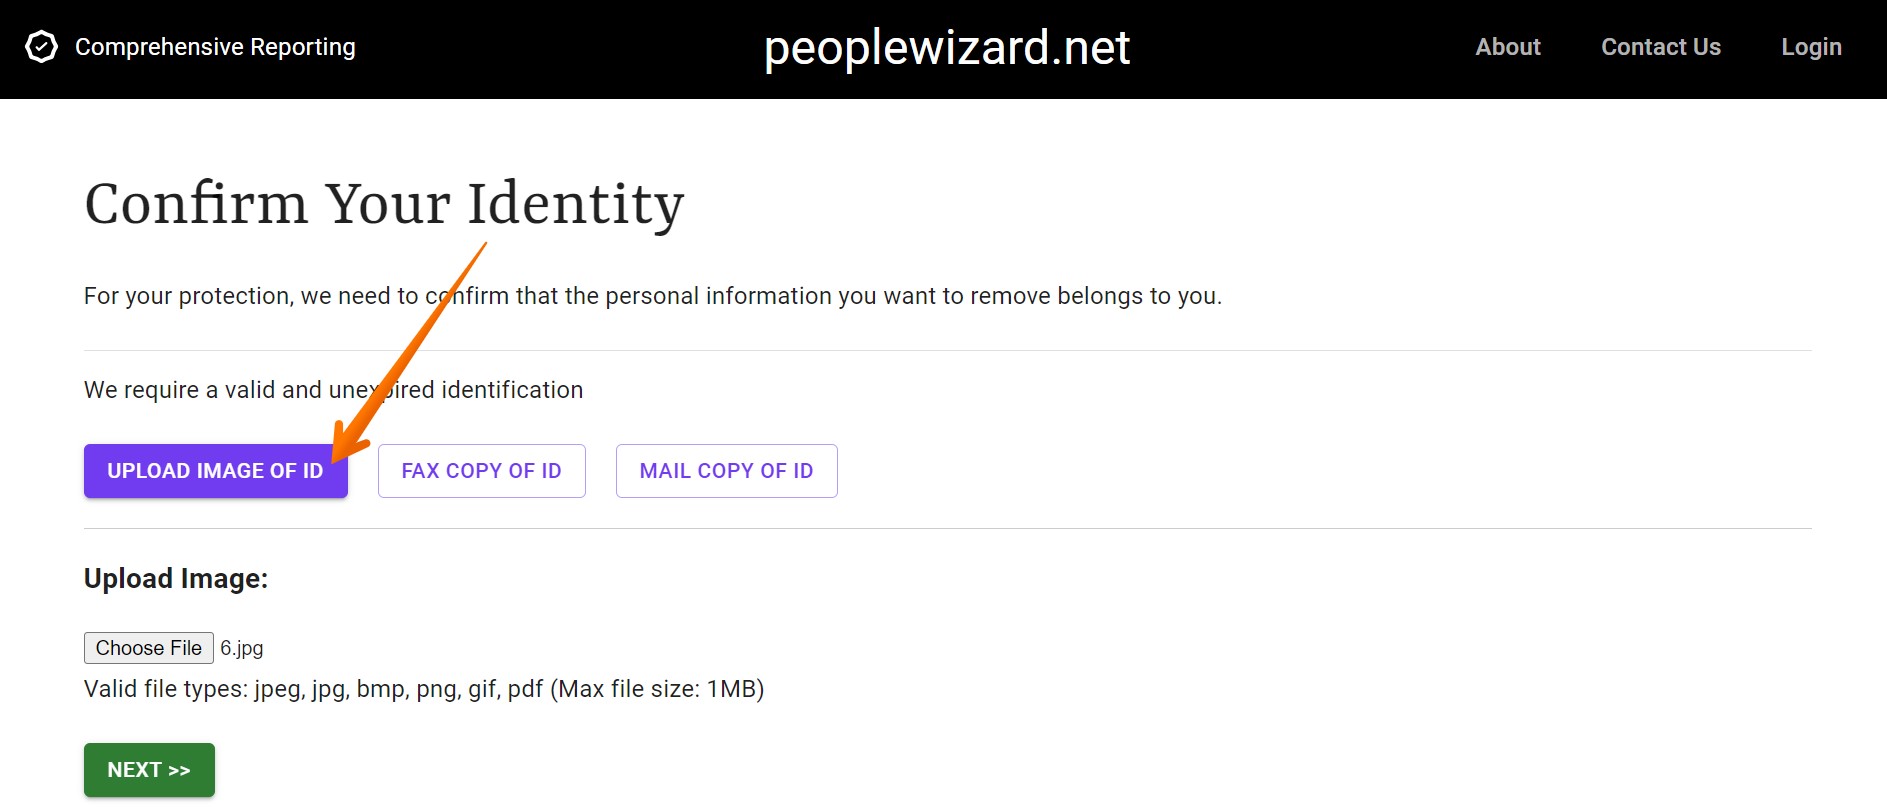 Upload any image to verify your identity (you don’t need to use a real one)